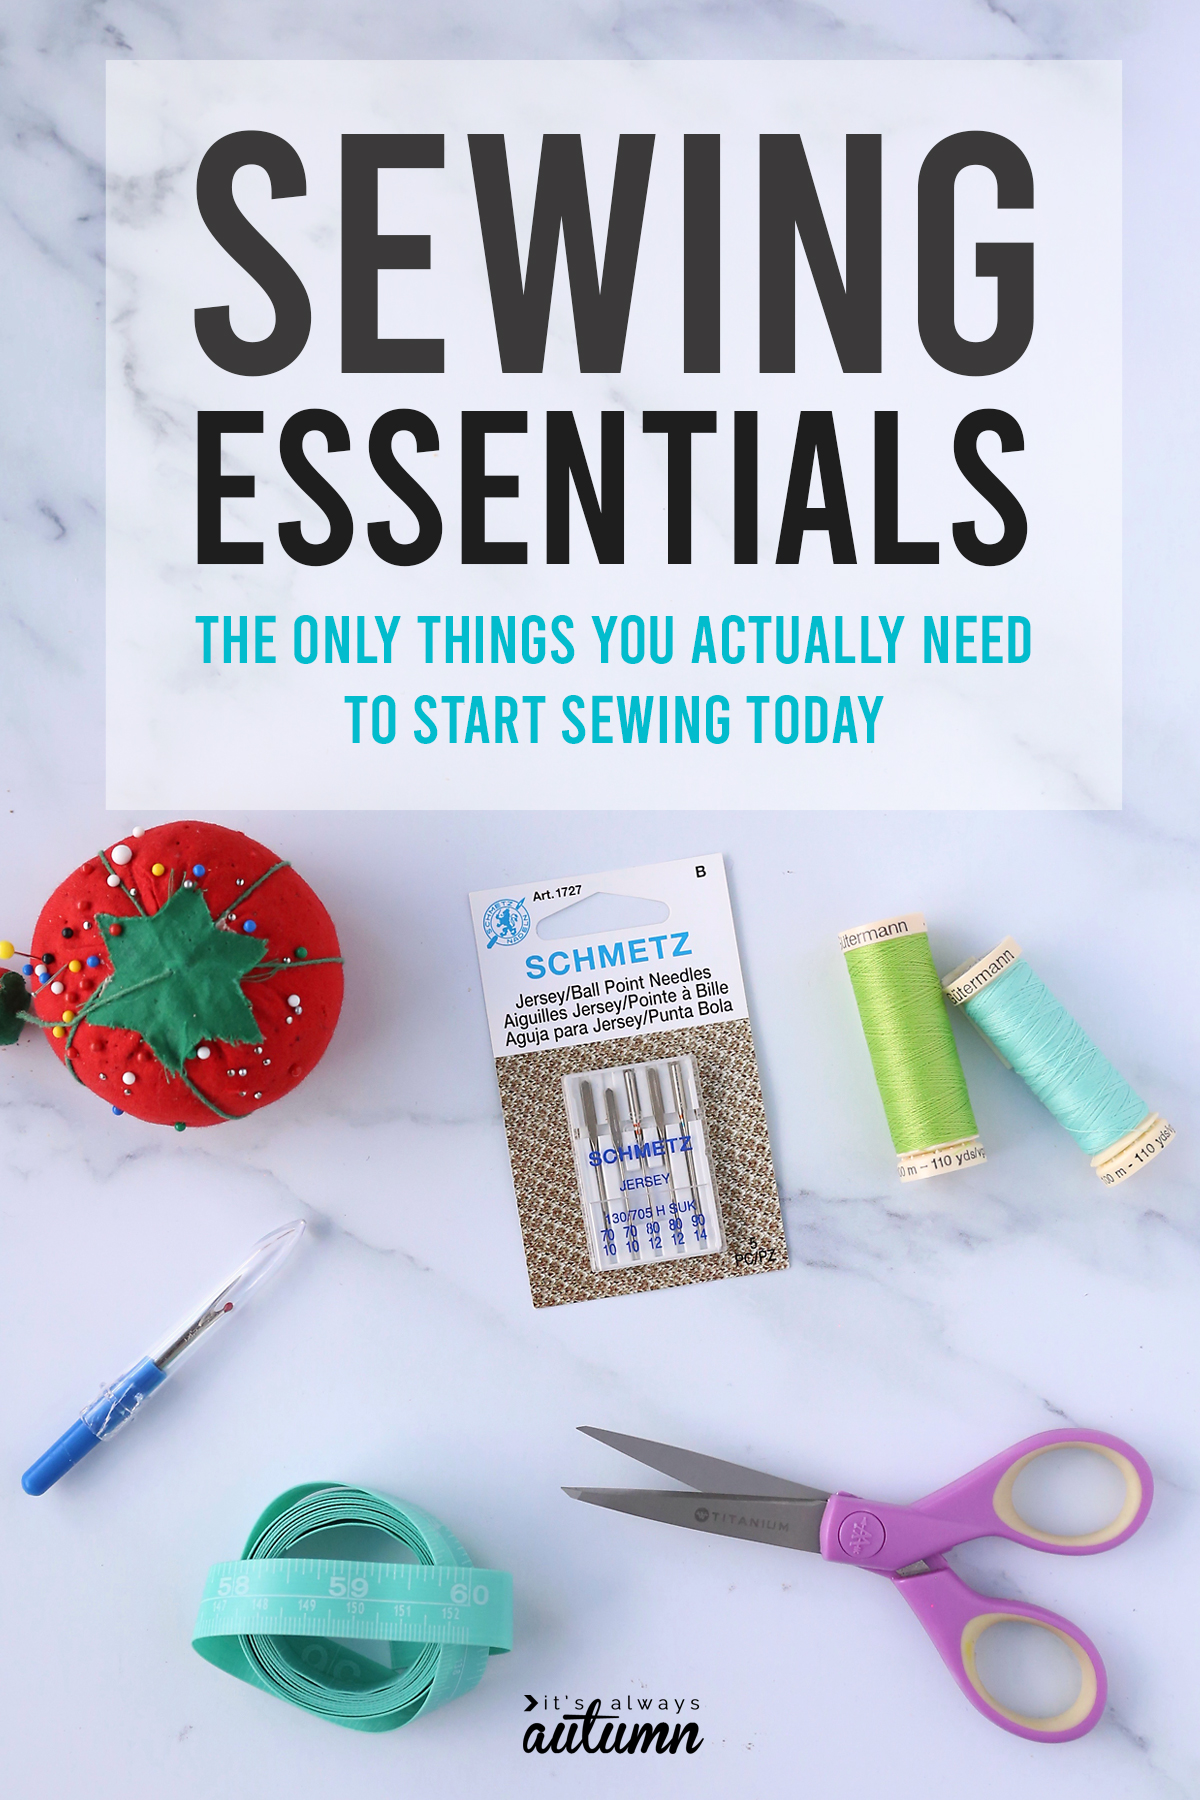 Sewing Notions - I Sew Need It